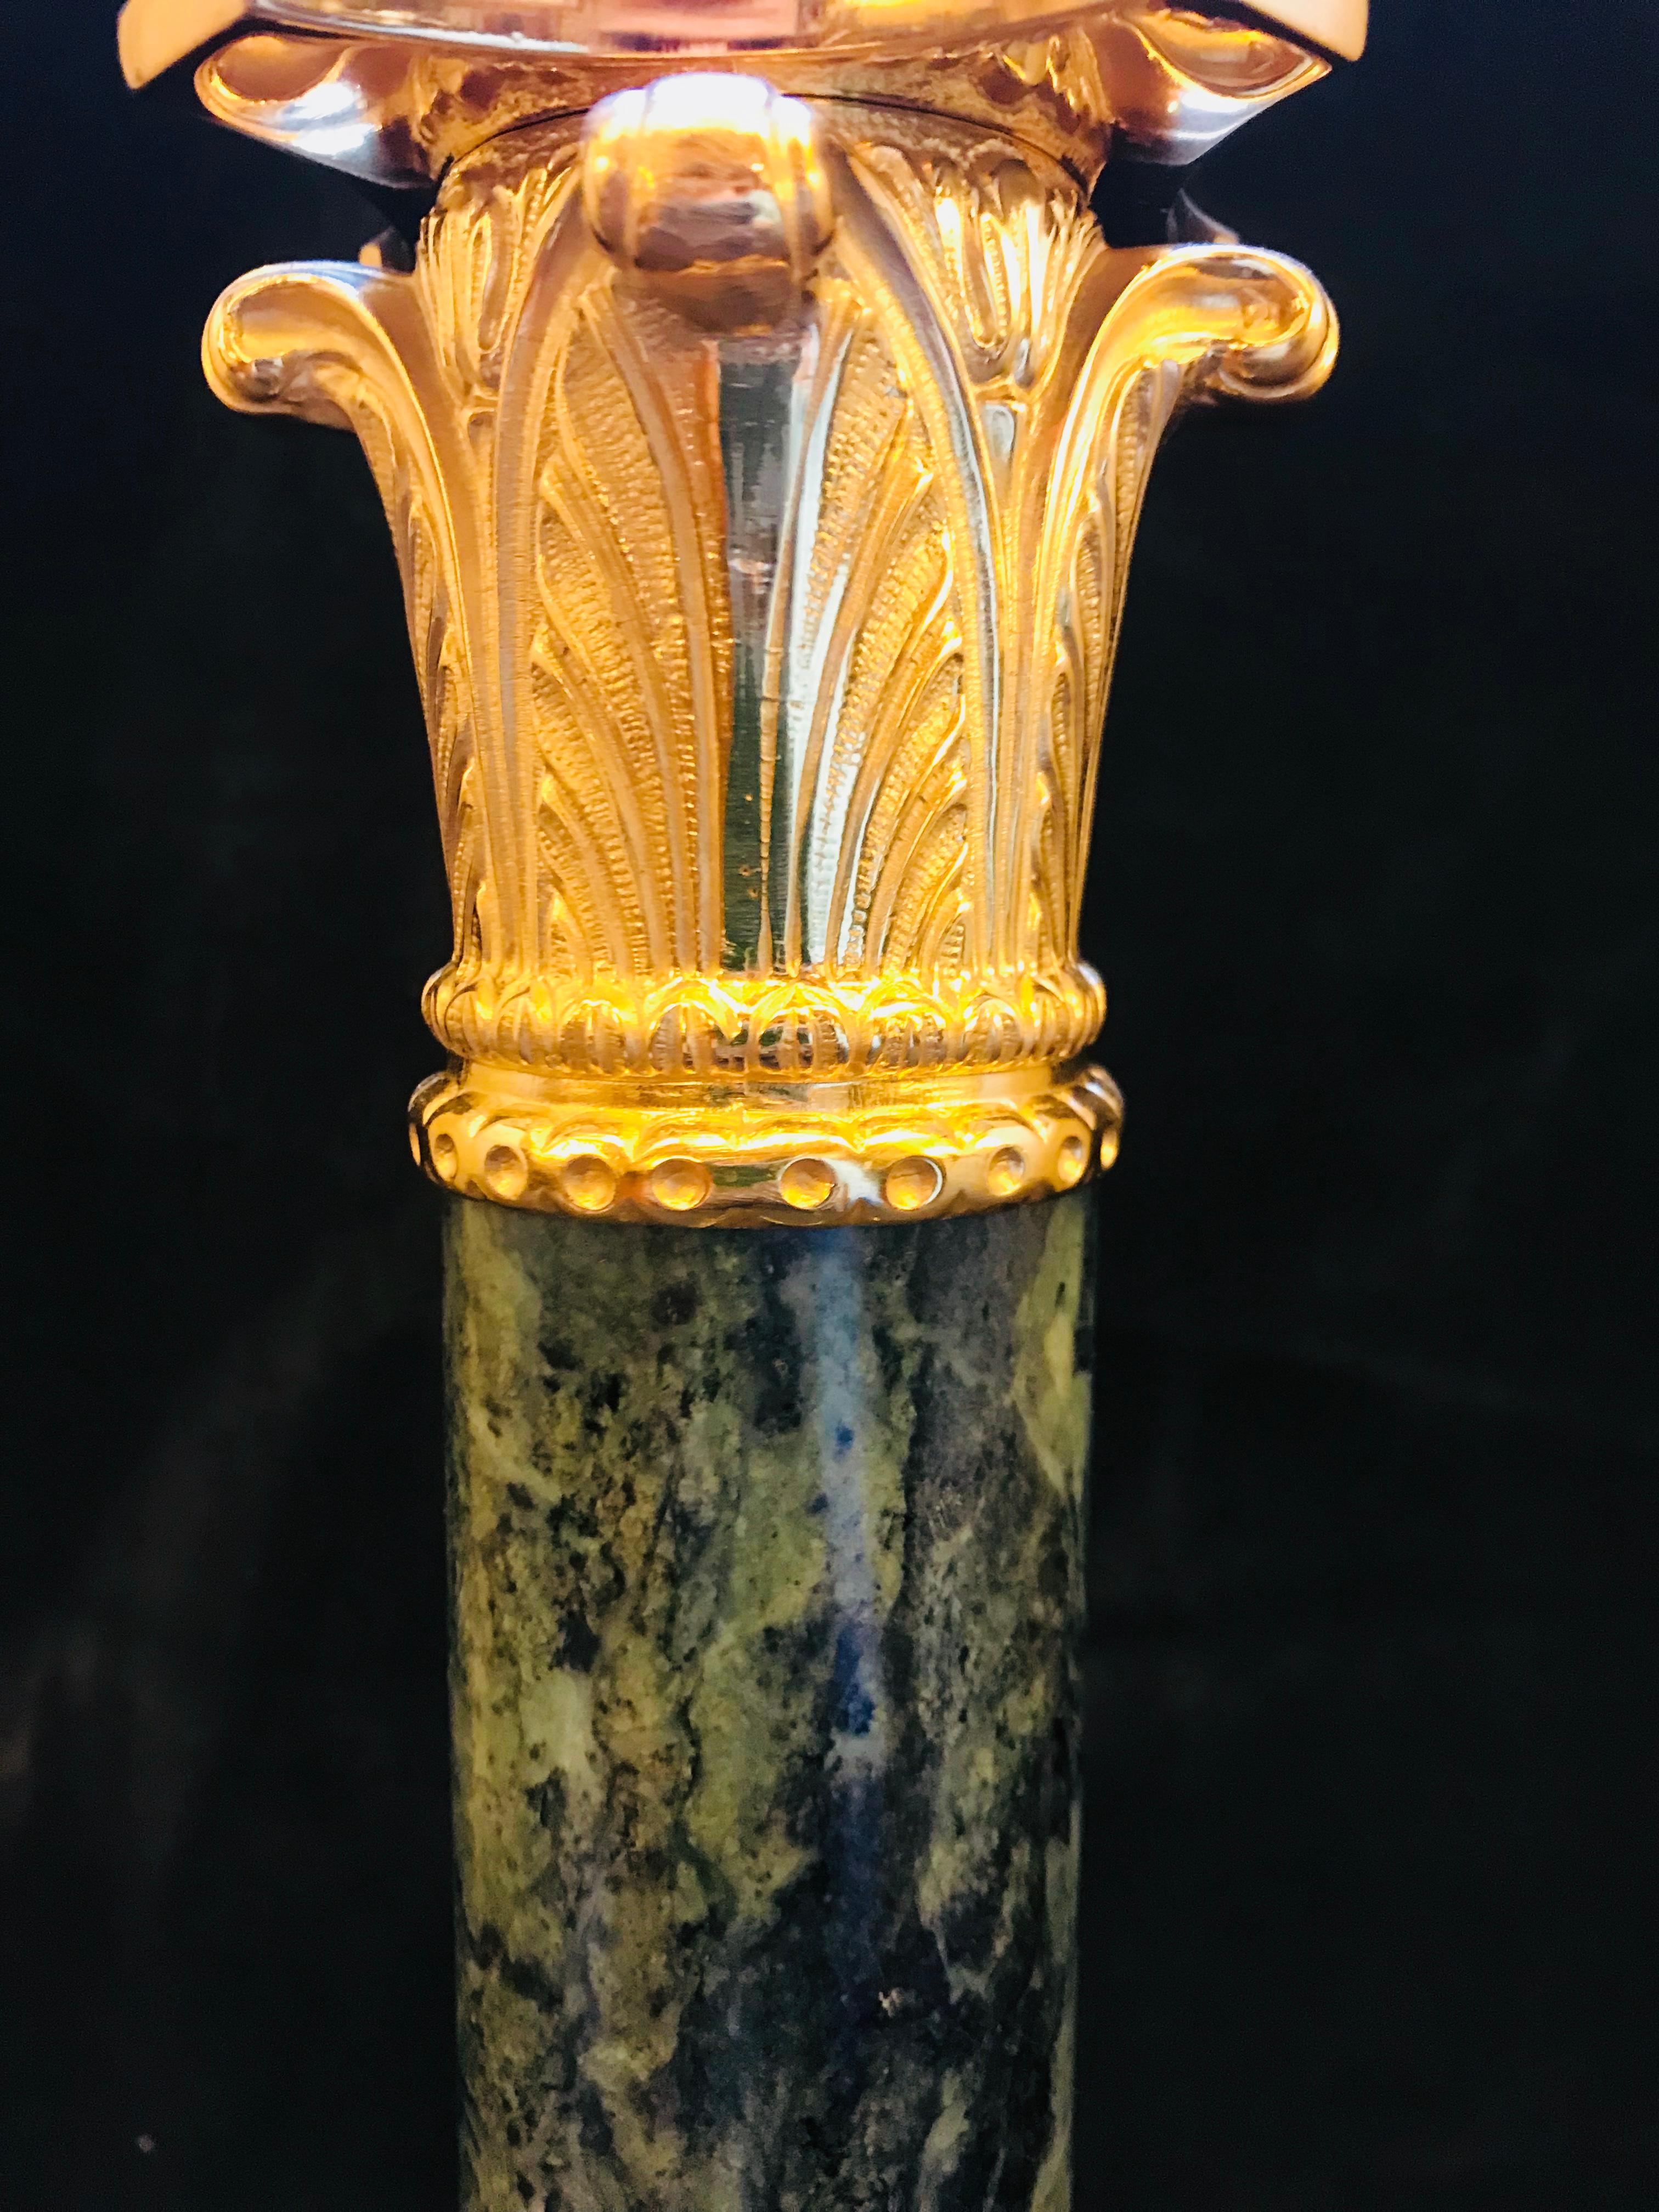 This elegant Neoclassical Style Gilt Bronze and Black Marble Lamp By Gherardo Degli Albizzi features high quality gilt bronze decoration such as the fully chiseled capital or the base with a decorative foliate motif. Marble column and circular base